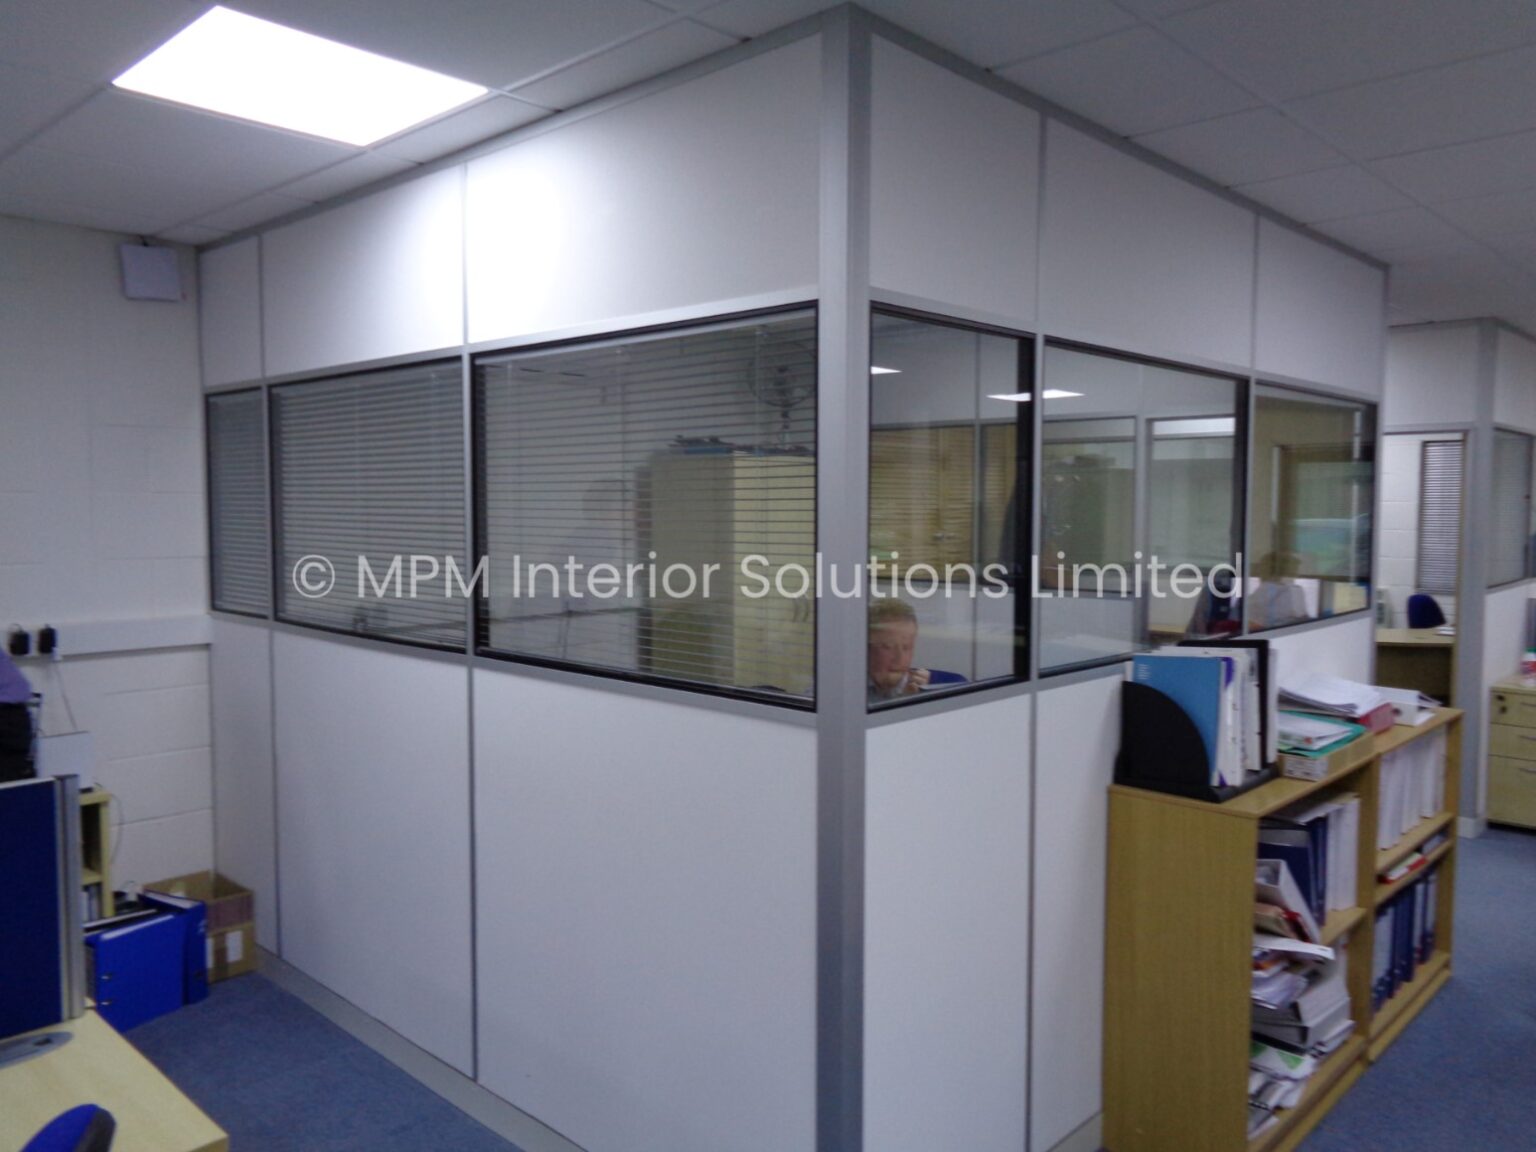 Frameless Glass Office Partitioning, Office Refurbishment/Fit-Out, 50mm Demountable Office Partitioning, Keysource Ltd (Horsham, West Sussex), MPM Interior Solutions Limited